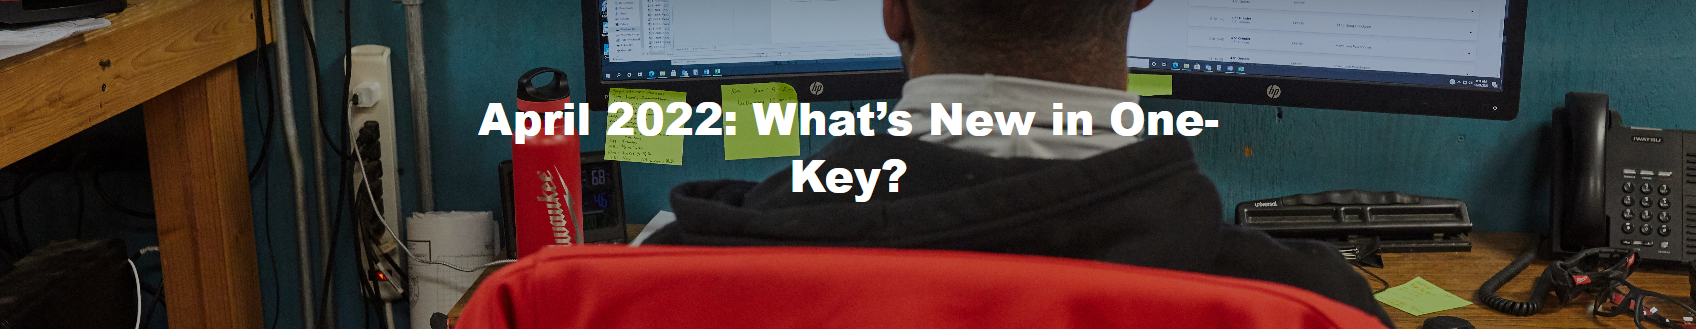 April 2022: What’s New in One-Key?